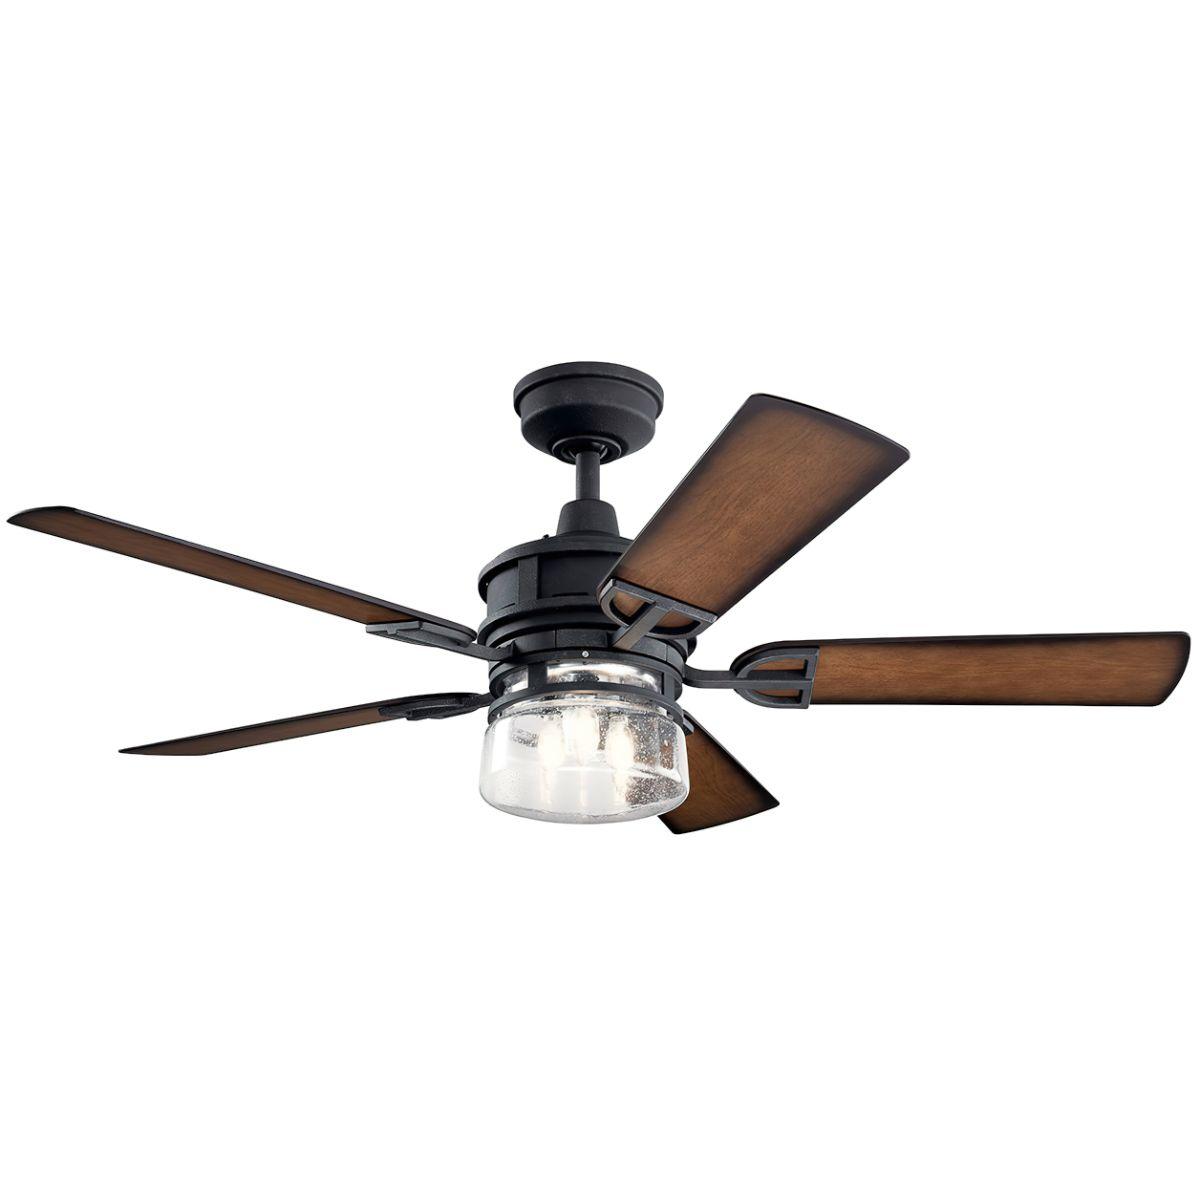 Lyndon 52 Inch Rustic Outdoor Ceiling Fan With Light, Wall Control Included - Bees Lighting